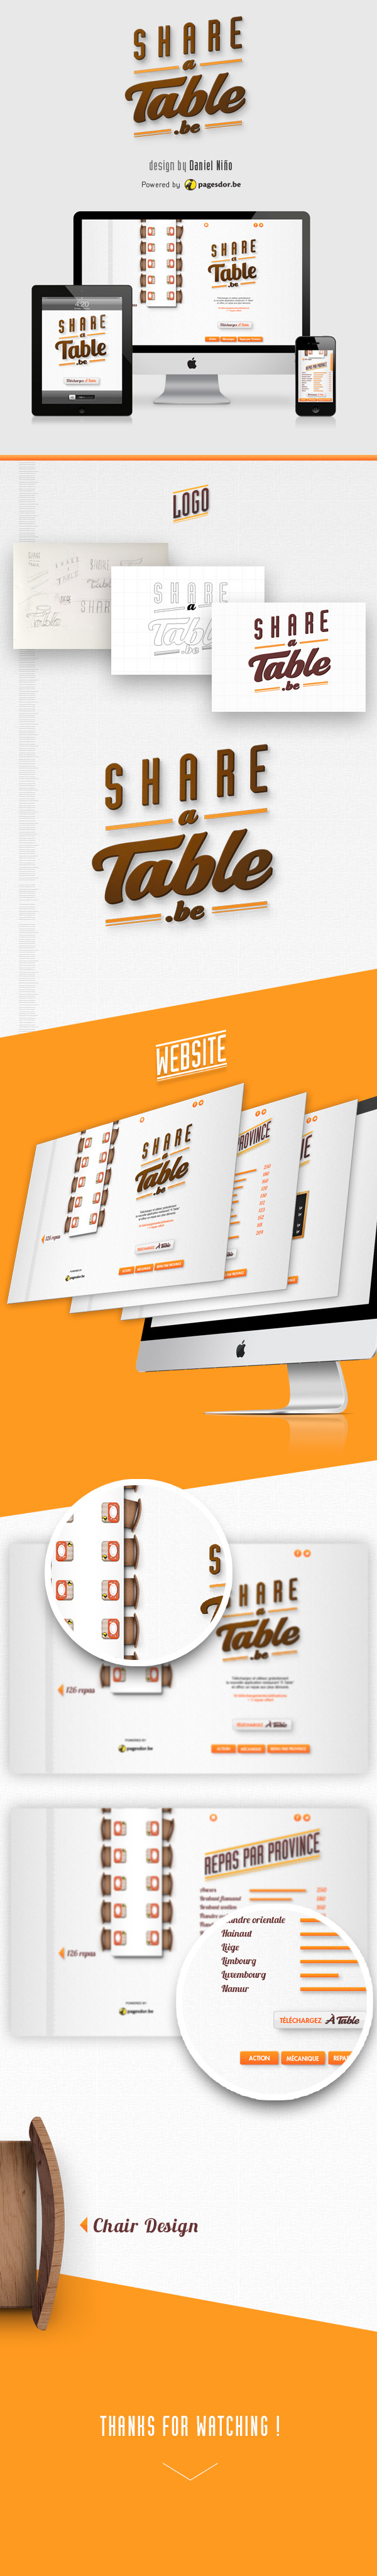 share table golden Gids gouden pages d'or Webdesign logo iphone graphic Layout belgium inspiration interactive